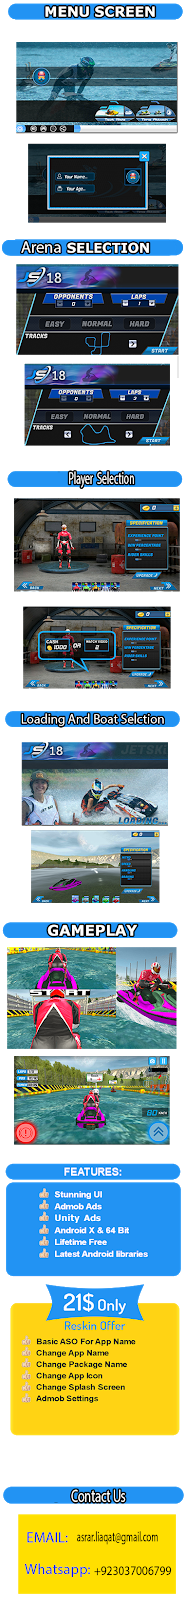 Speedy Boats Boat Rush - Water Racing Battle 3d game - 1